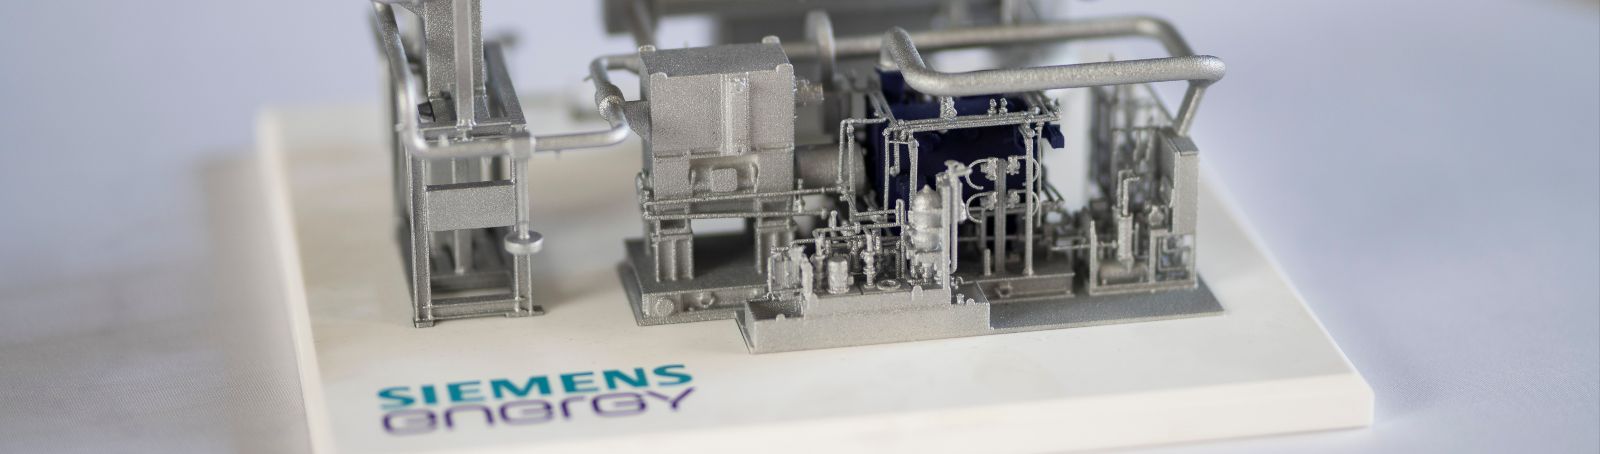 A model of the heat pump, built by Siemens Energy, that is being used in the Qwark3 project